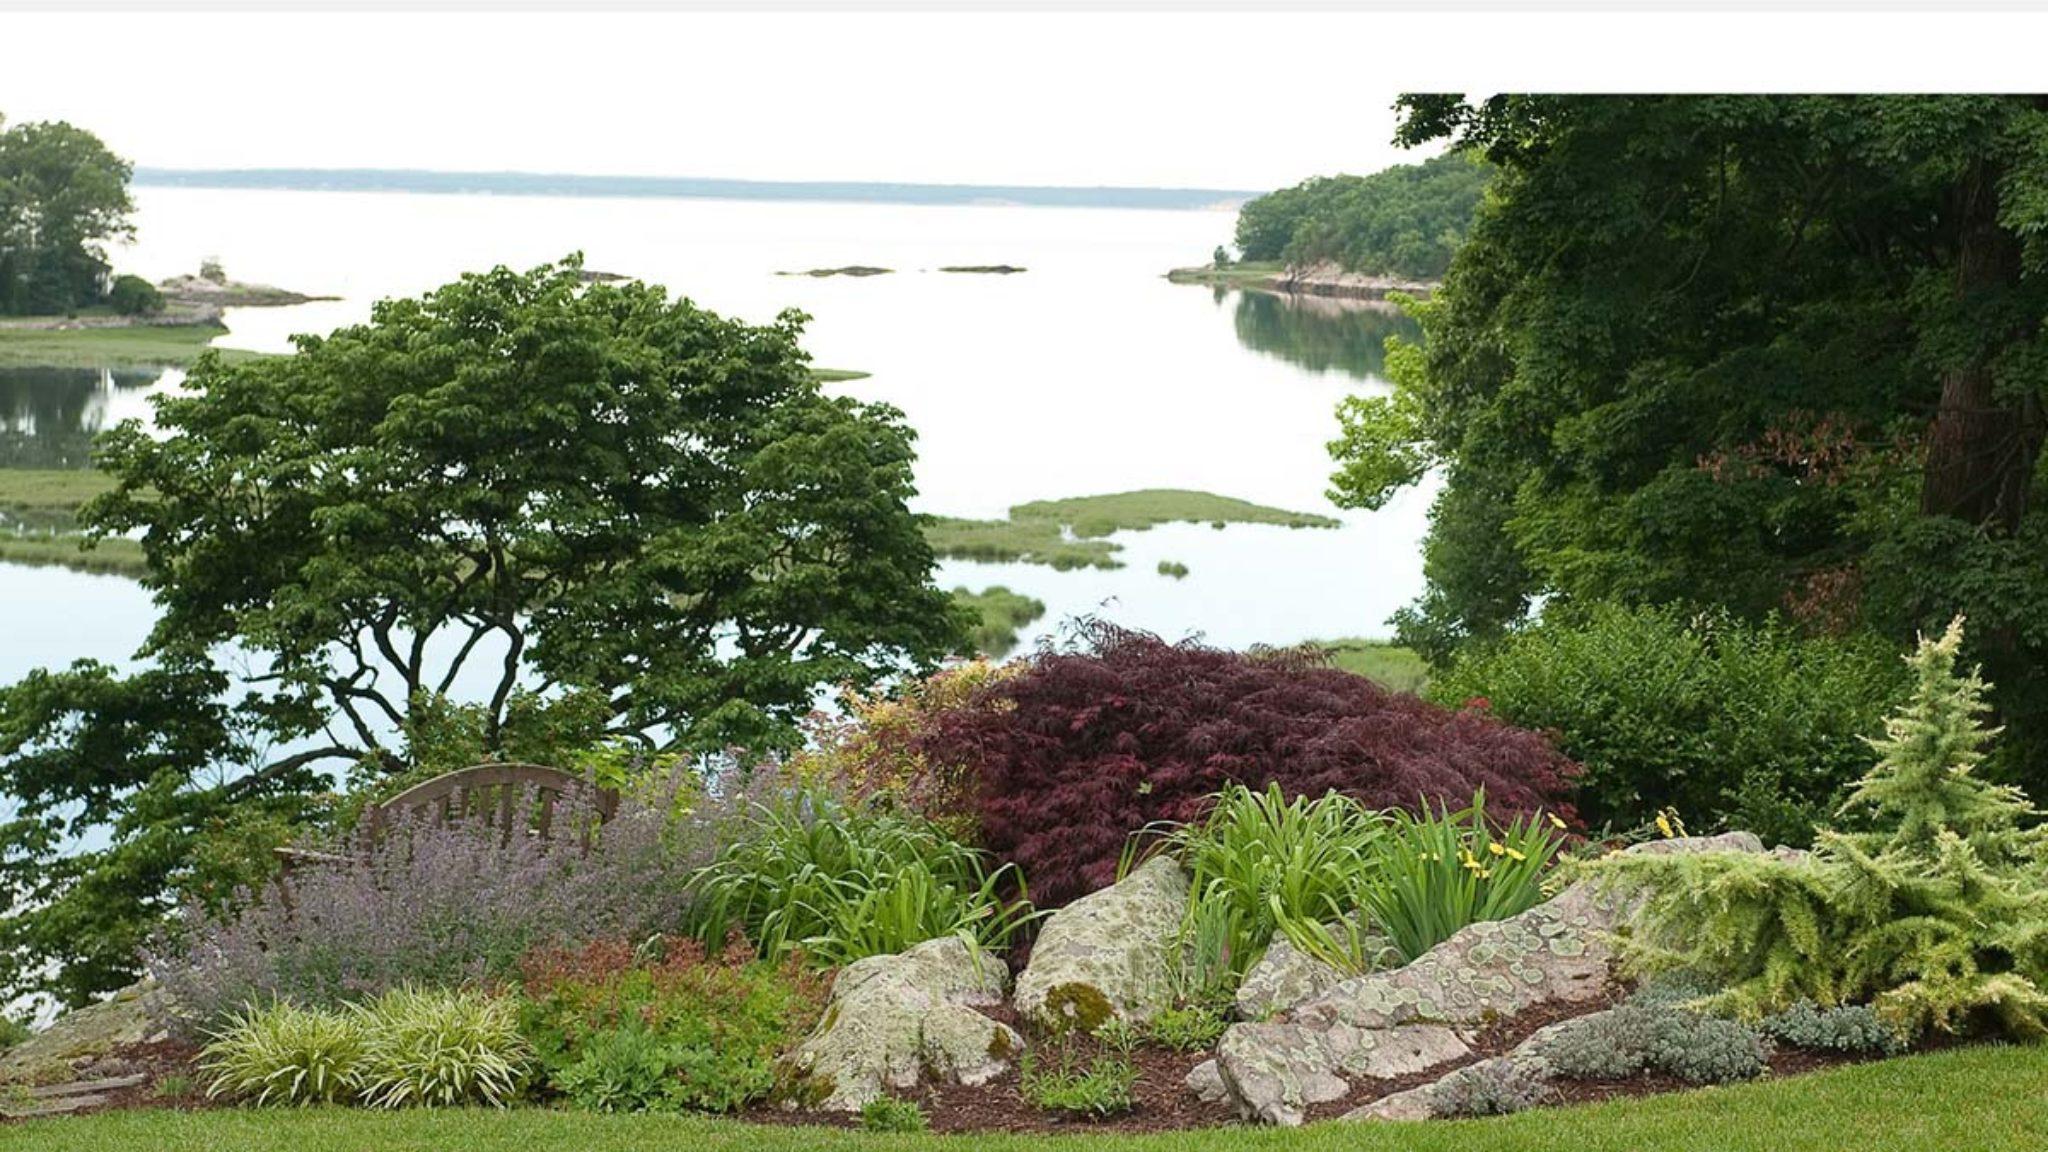 Landscape of various plants by the shore including Regal Mist Pink Muhly Grass, Cabaret Japanese Silver Grass, and conifers.